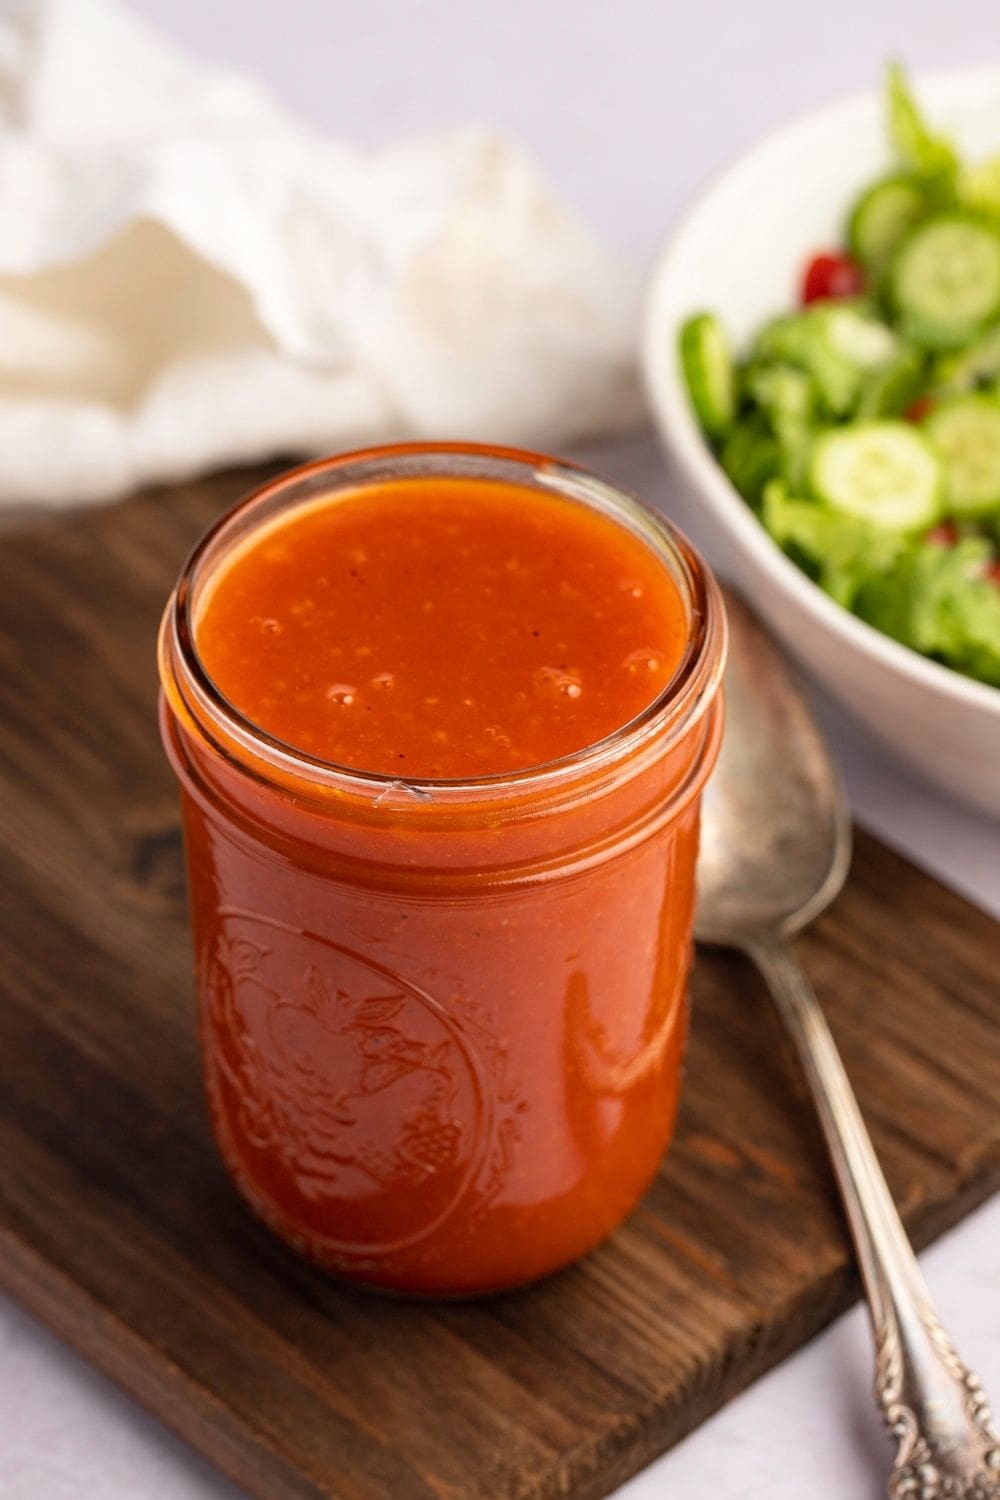 Homemade salad dressings: Say goodbye to the bottle